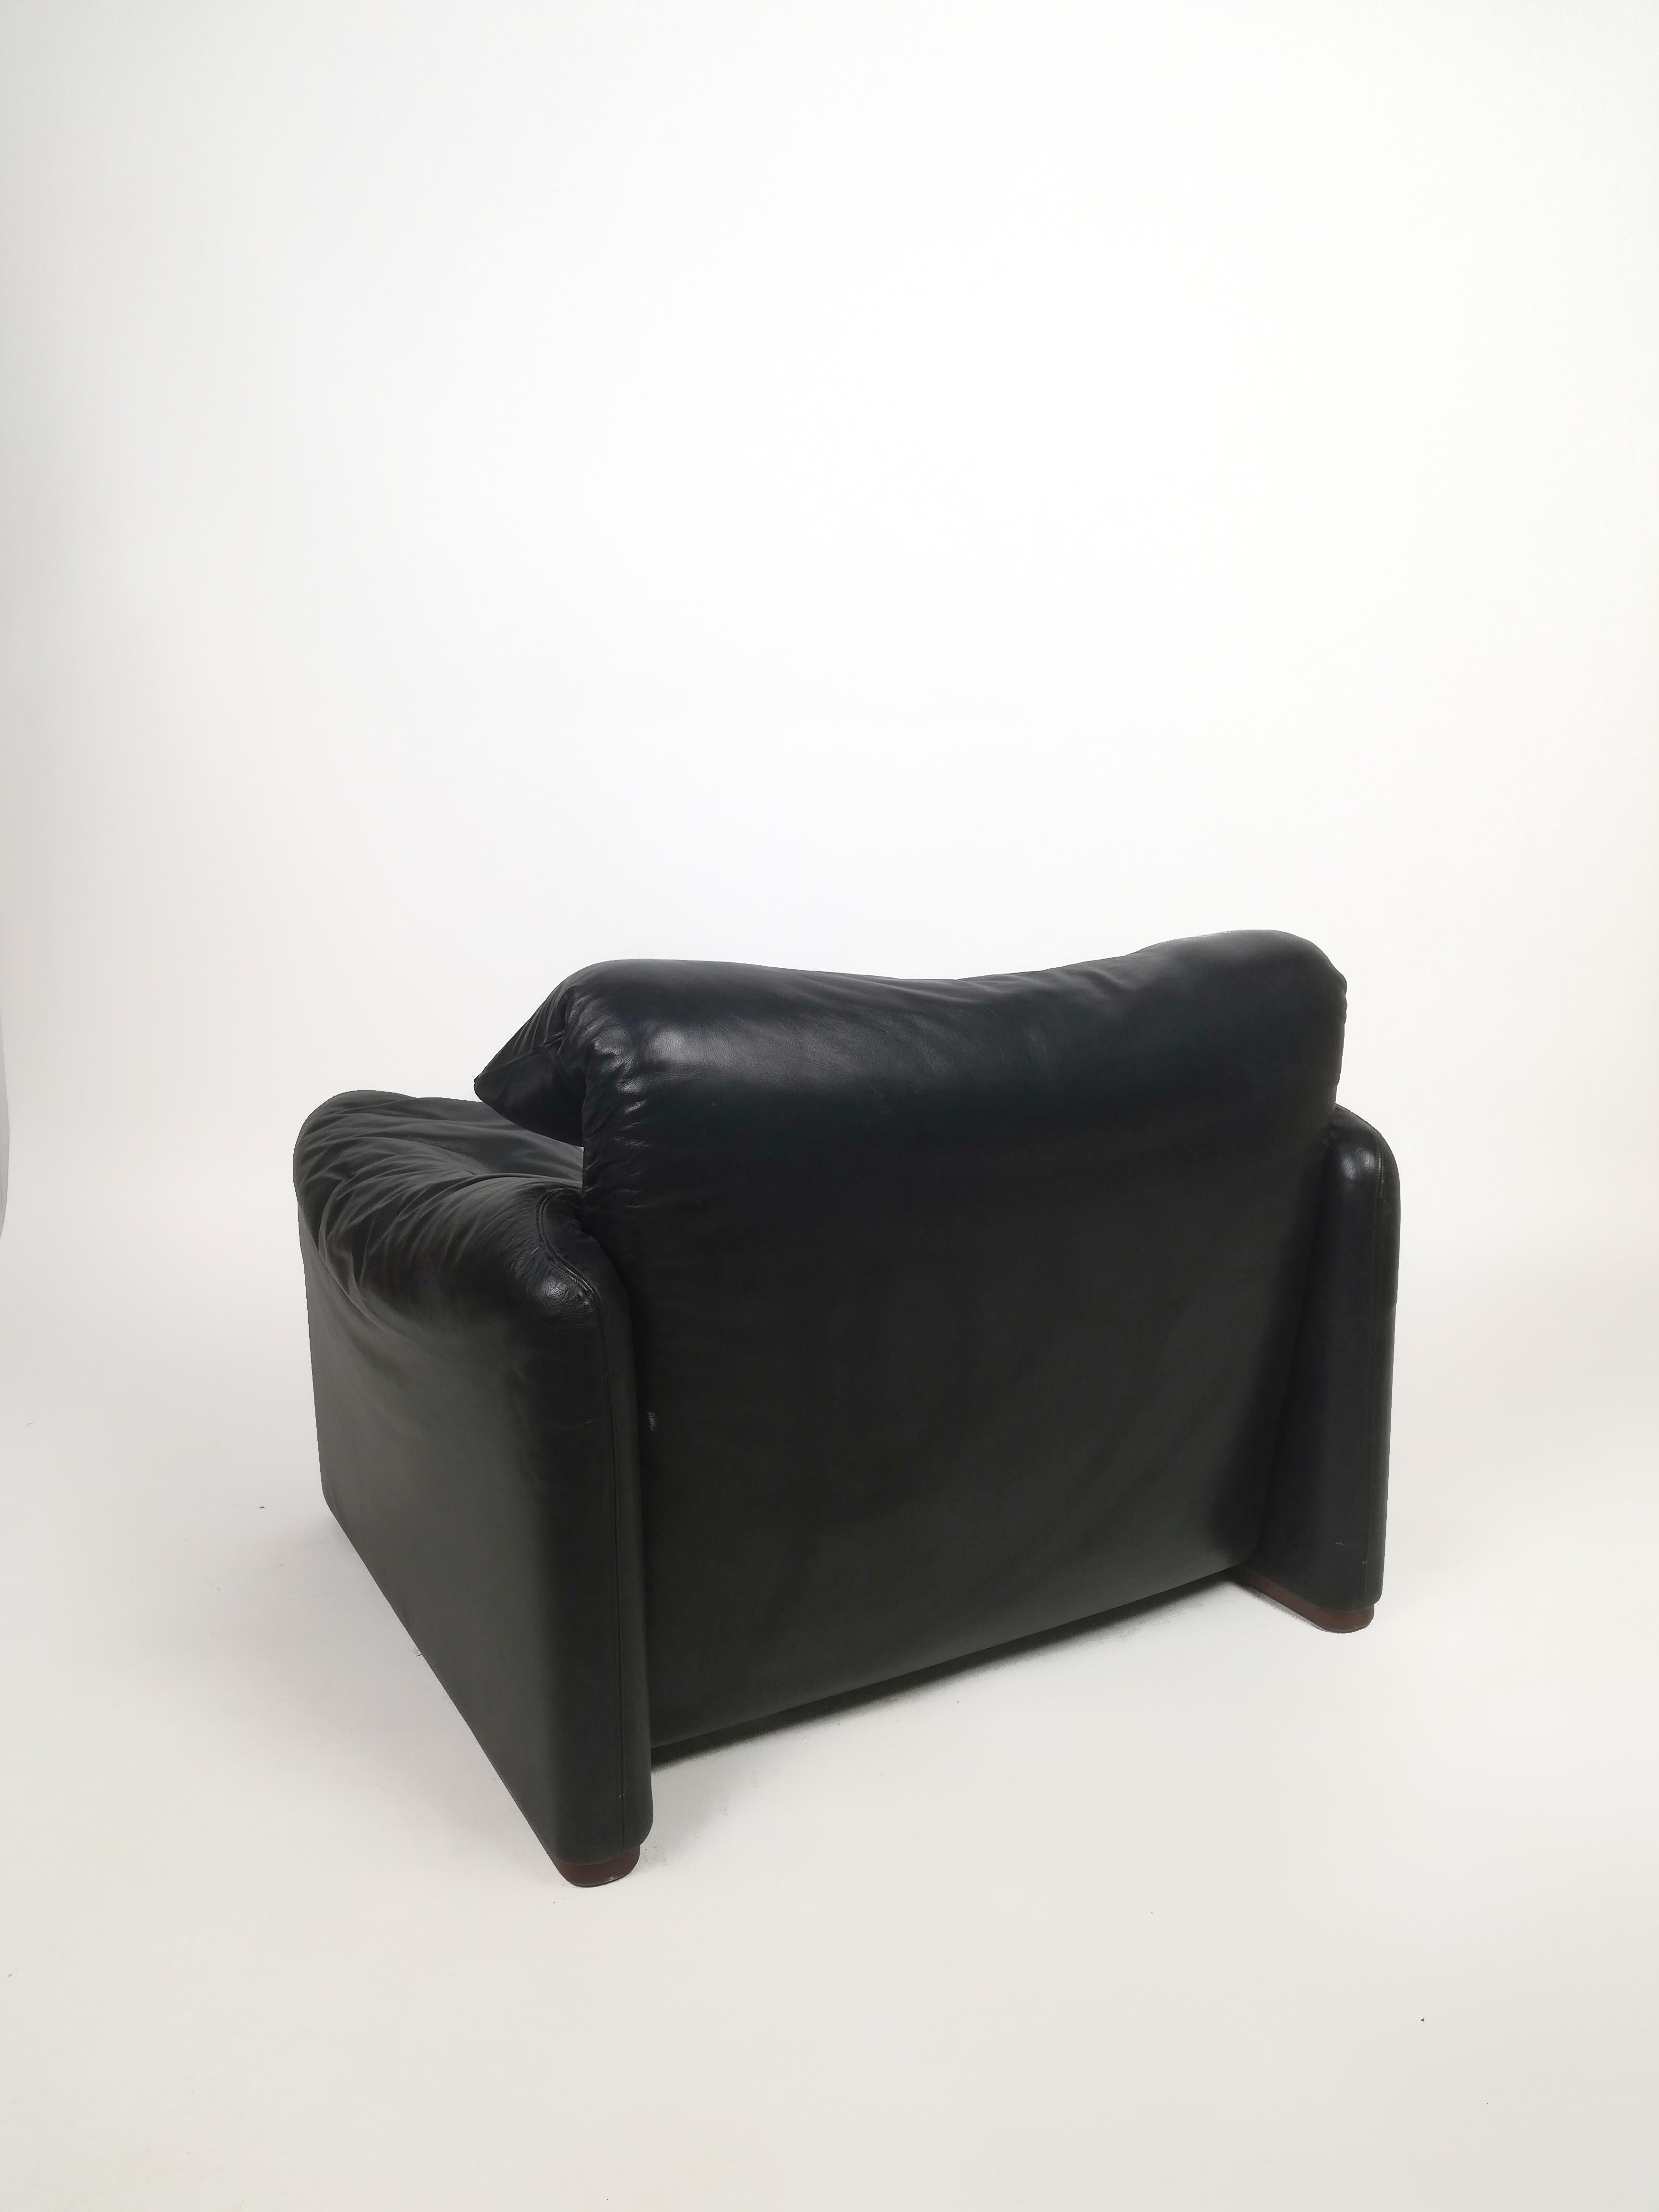 Set of Two Maralunga Black Leather Armchairs by Vico Magistretti For Sale 3